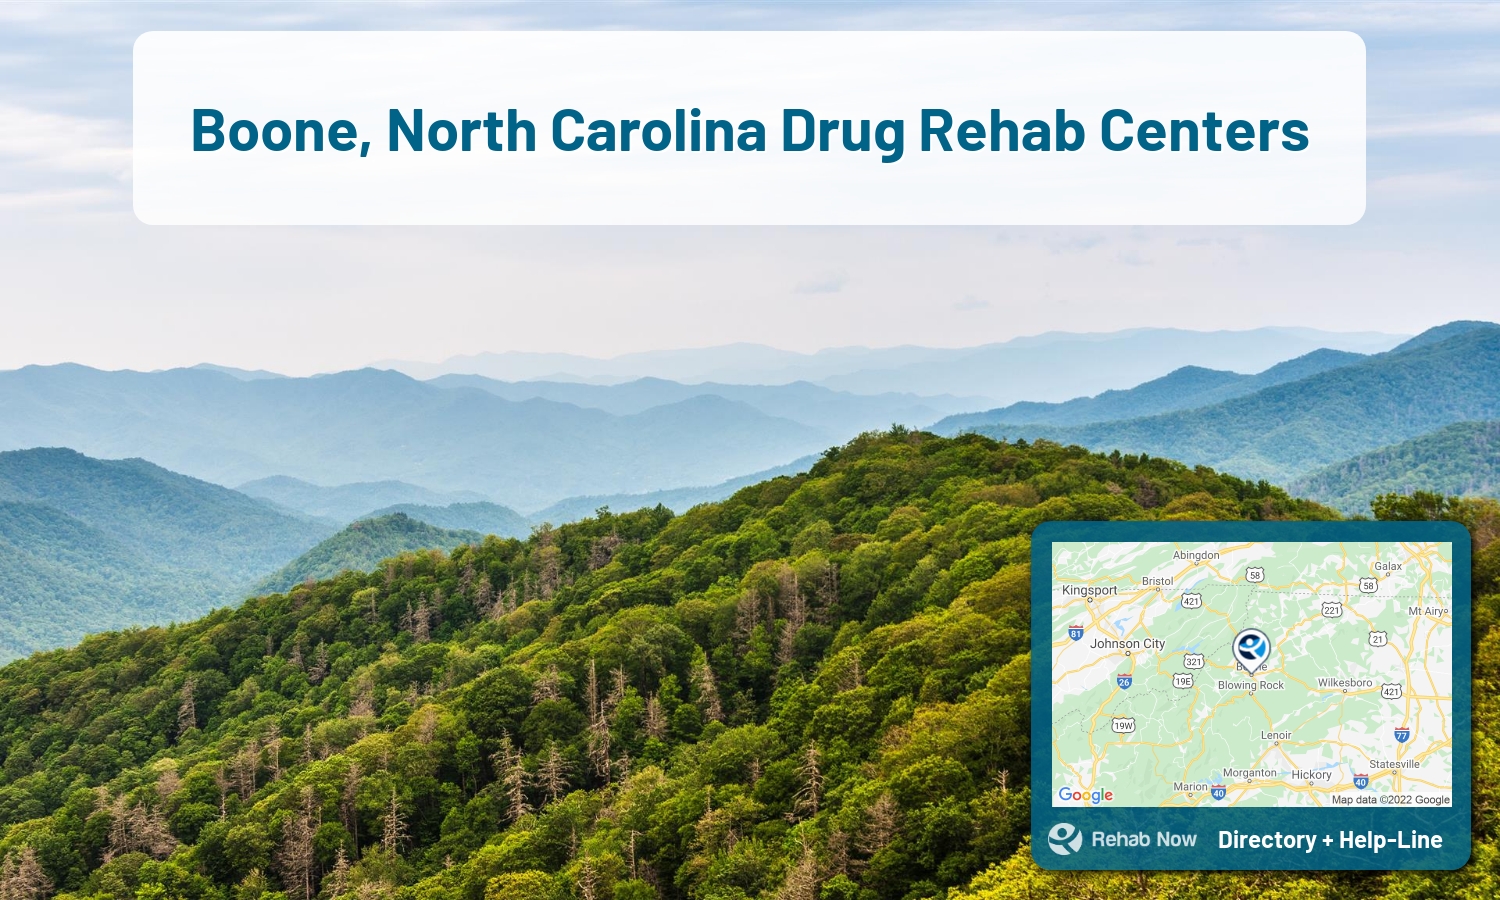 Ready to pick a rehab center in Boone? Get off alcohol, opiates, and other drugs, by selecting top drug rehab centers in North Carolina